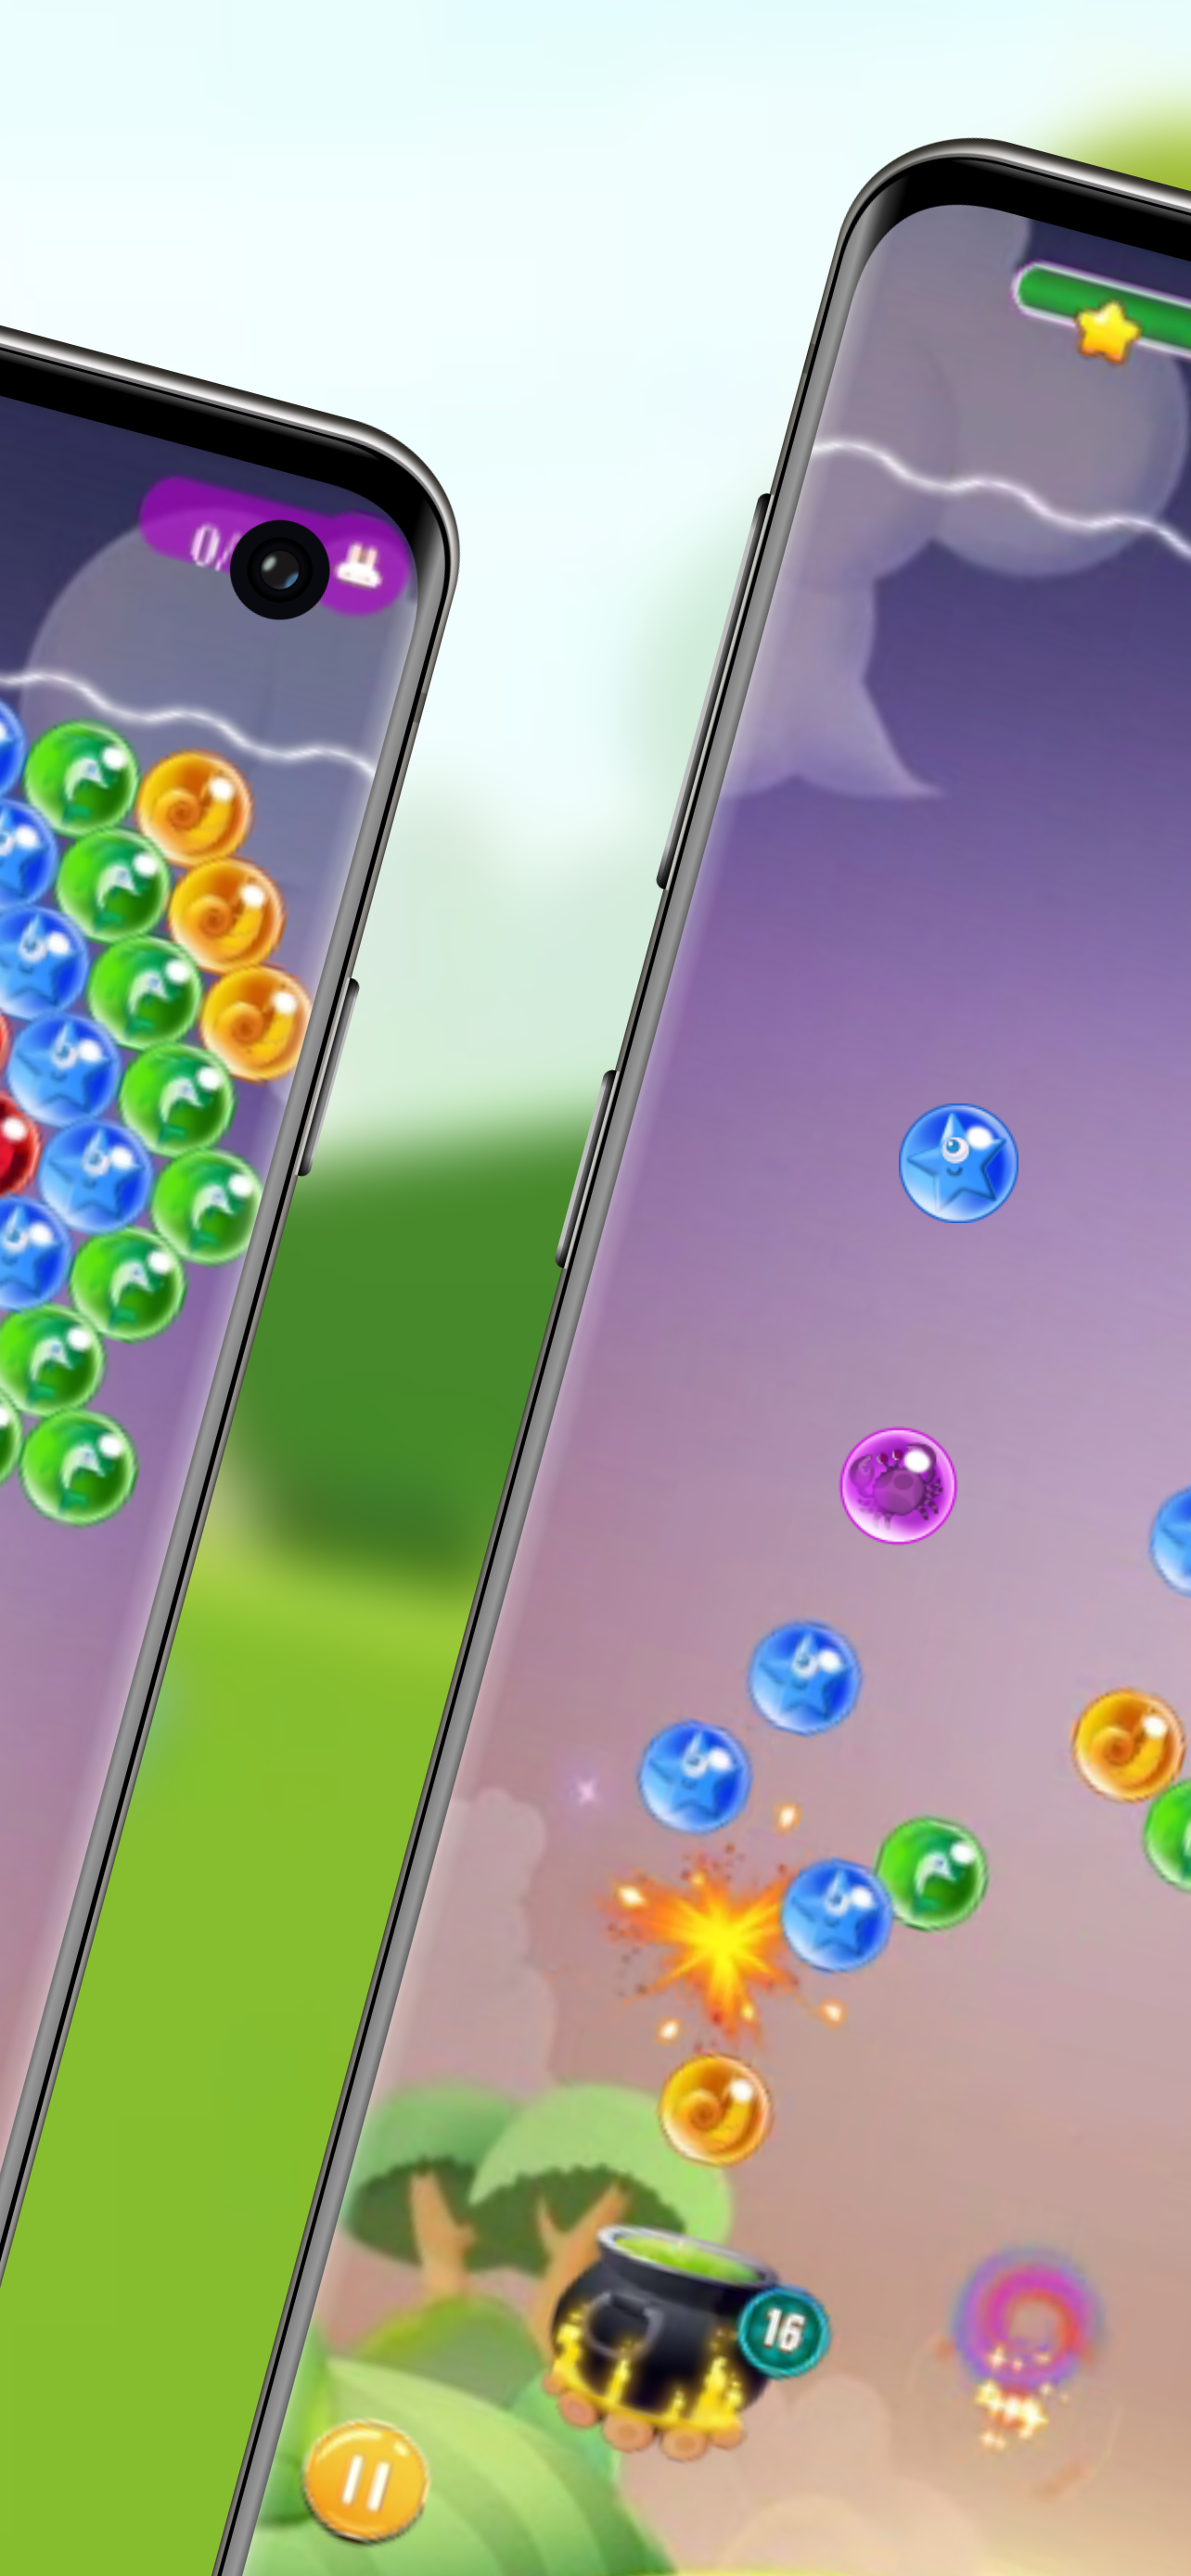 Bunny Shooter Bubble Match mobile android iOS apk download for free-TapTap